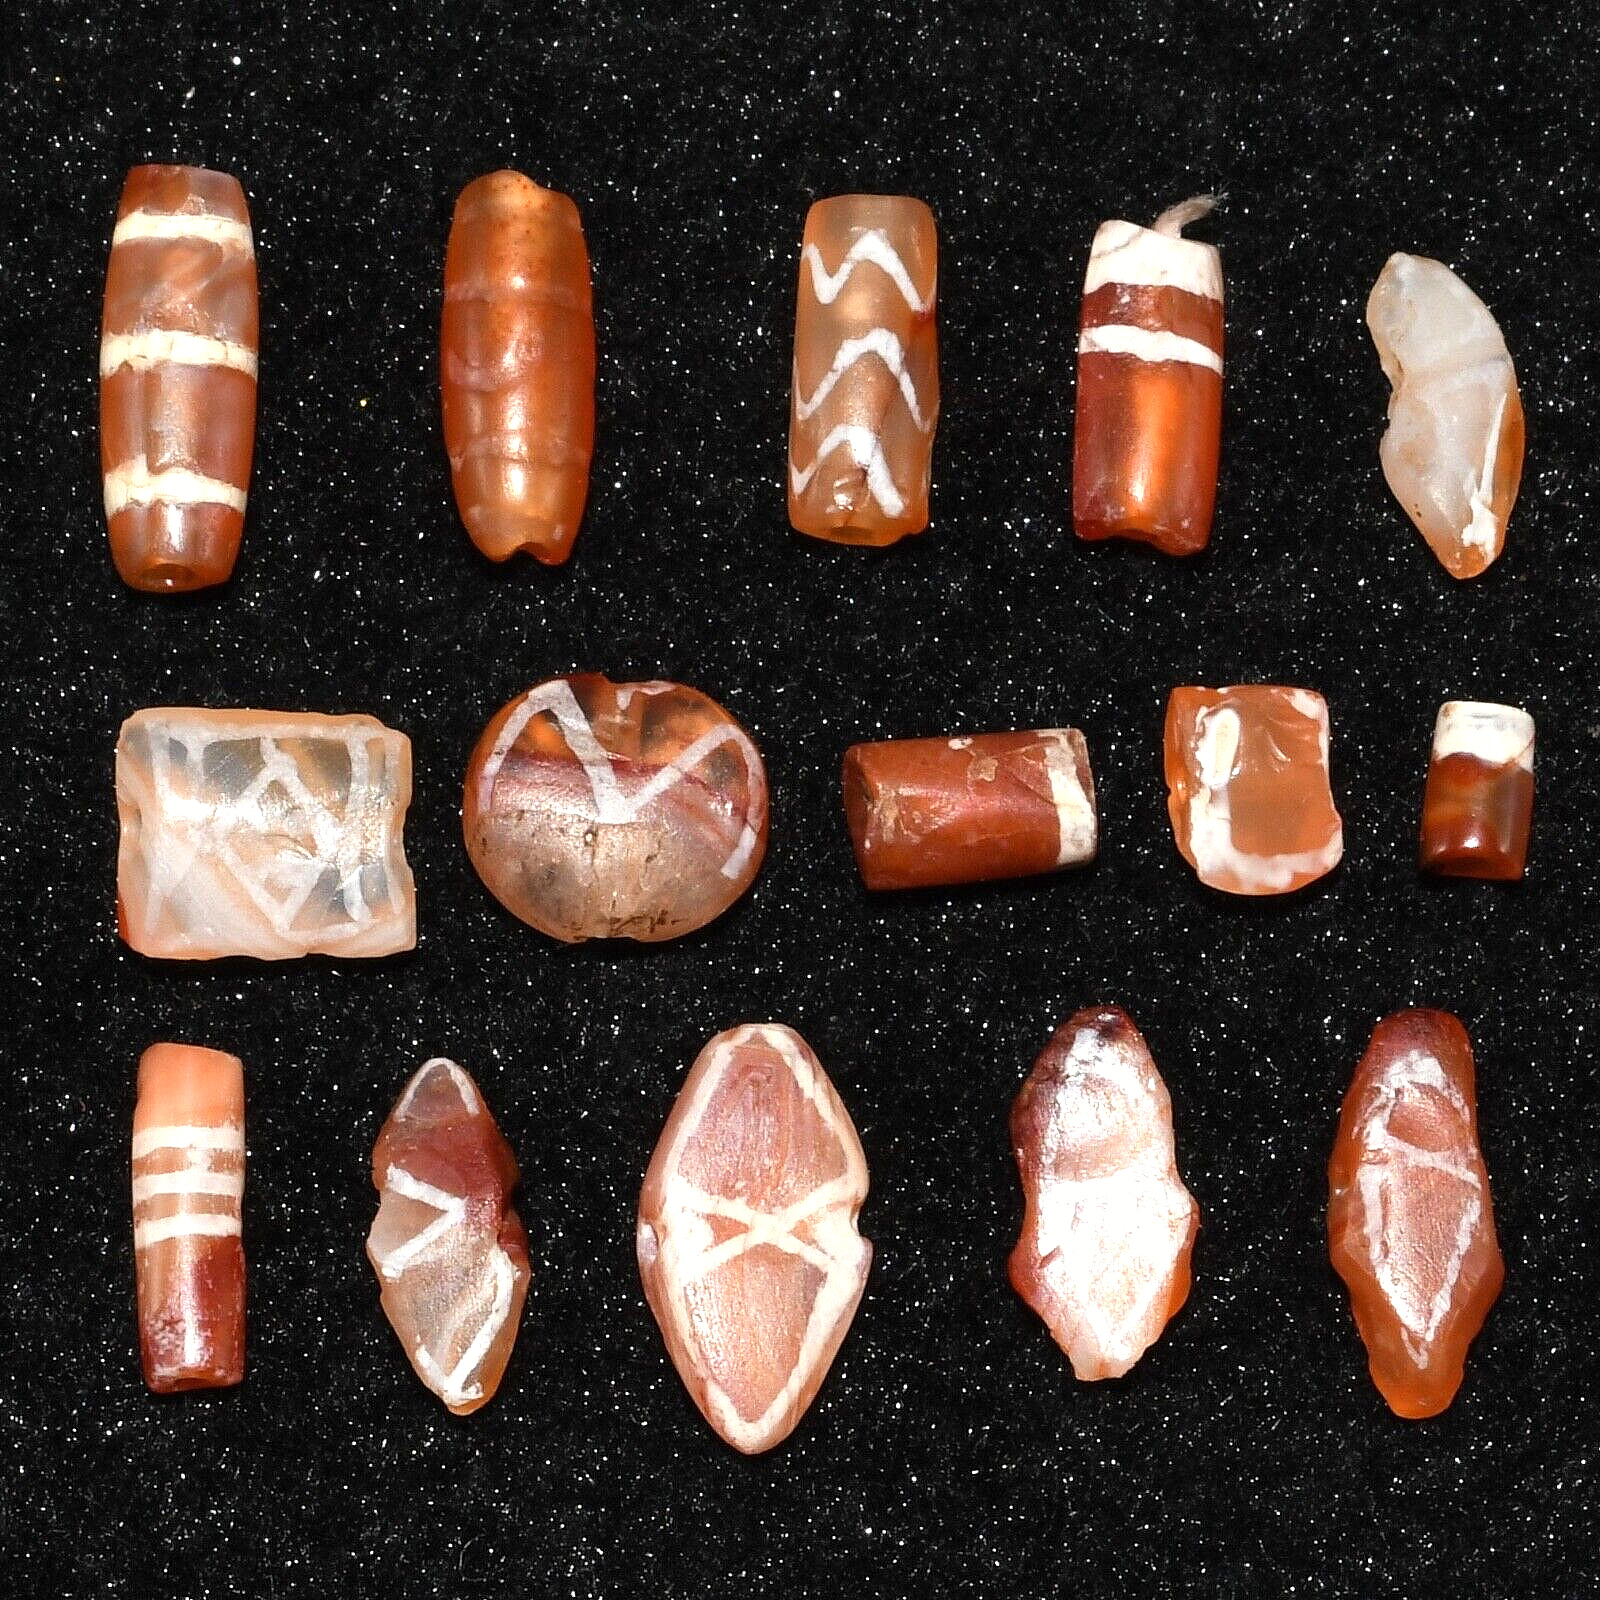 15 Ancient Etched Carnelian Beads in Good Condition 1500 to 2000 Years Old